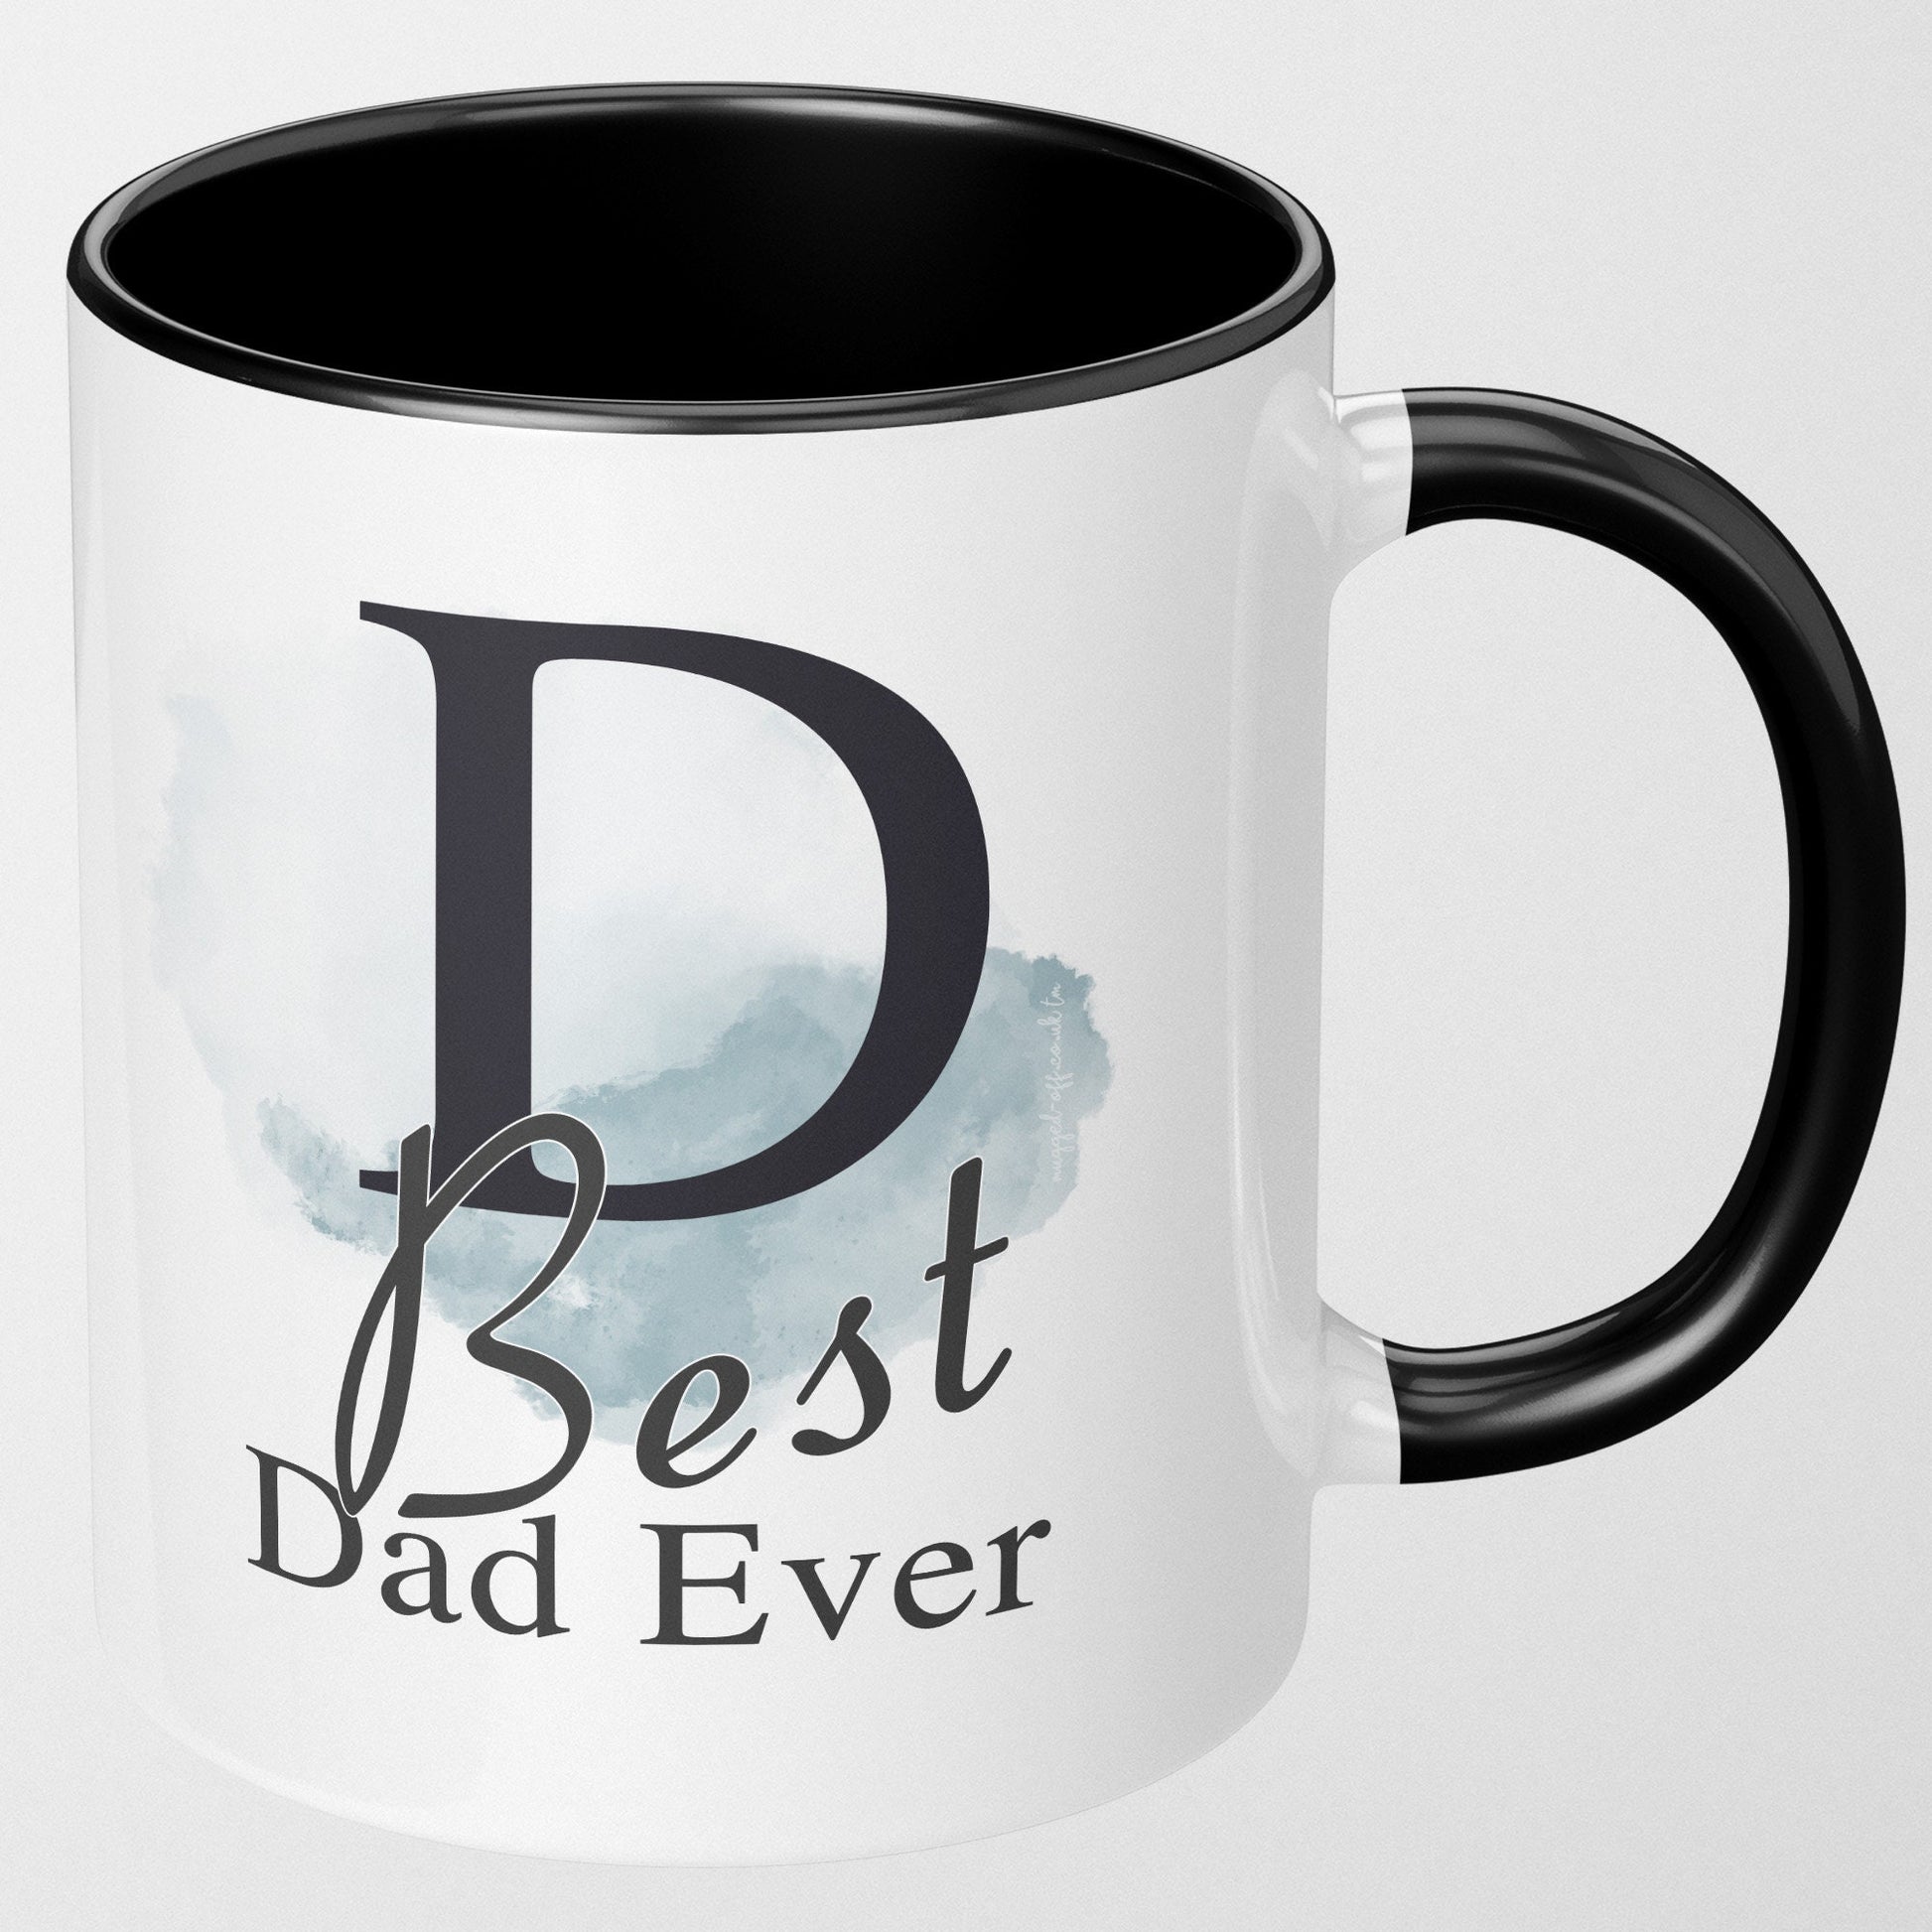 Magic Photo Mug: personalized magic mugs with your photos and texts |  Colorland US